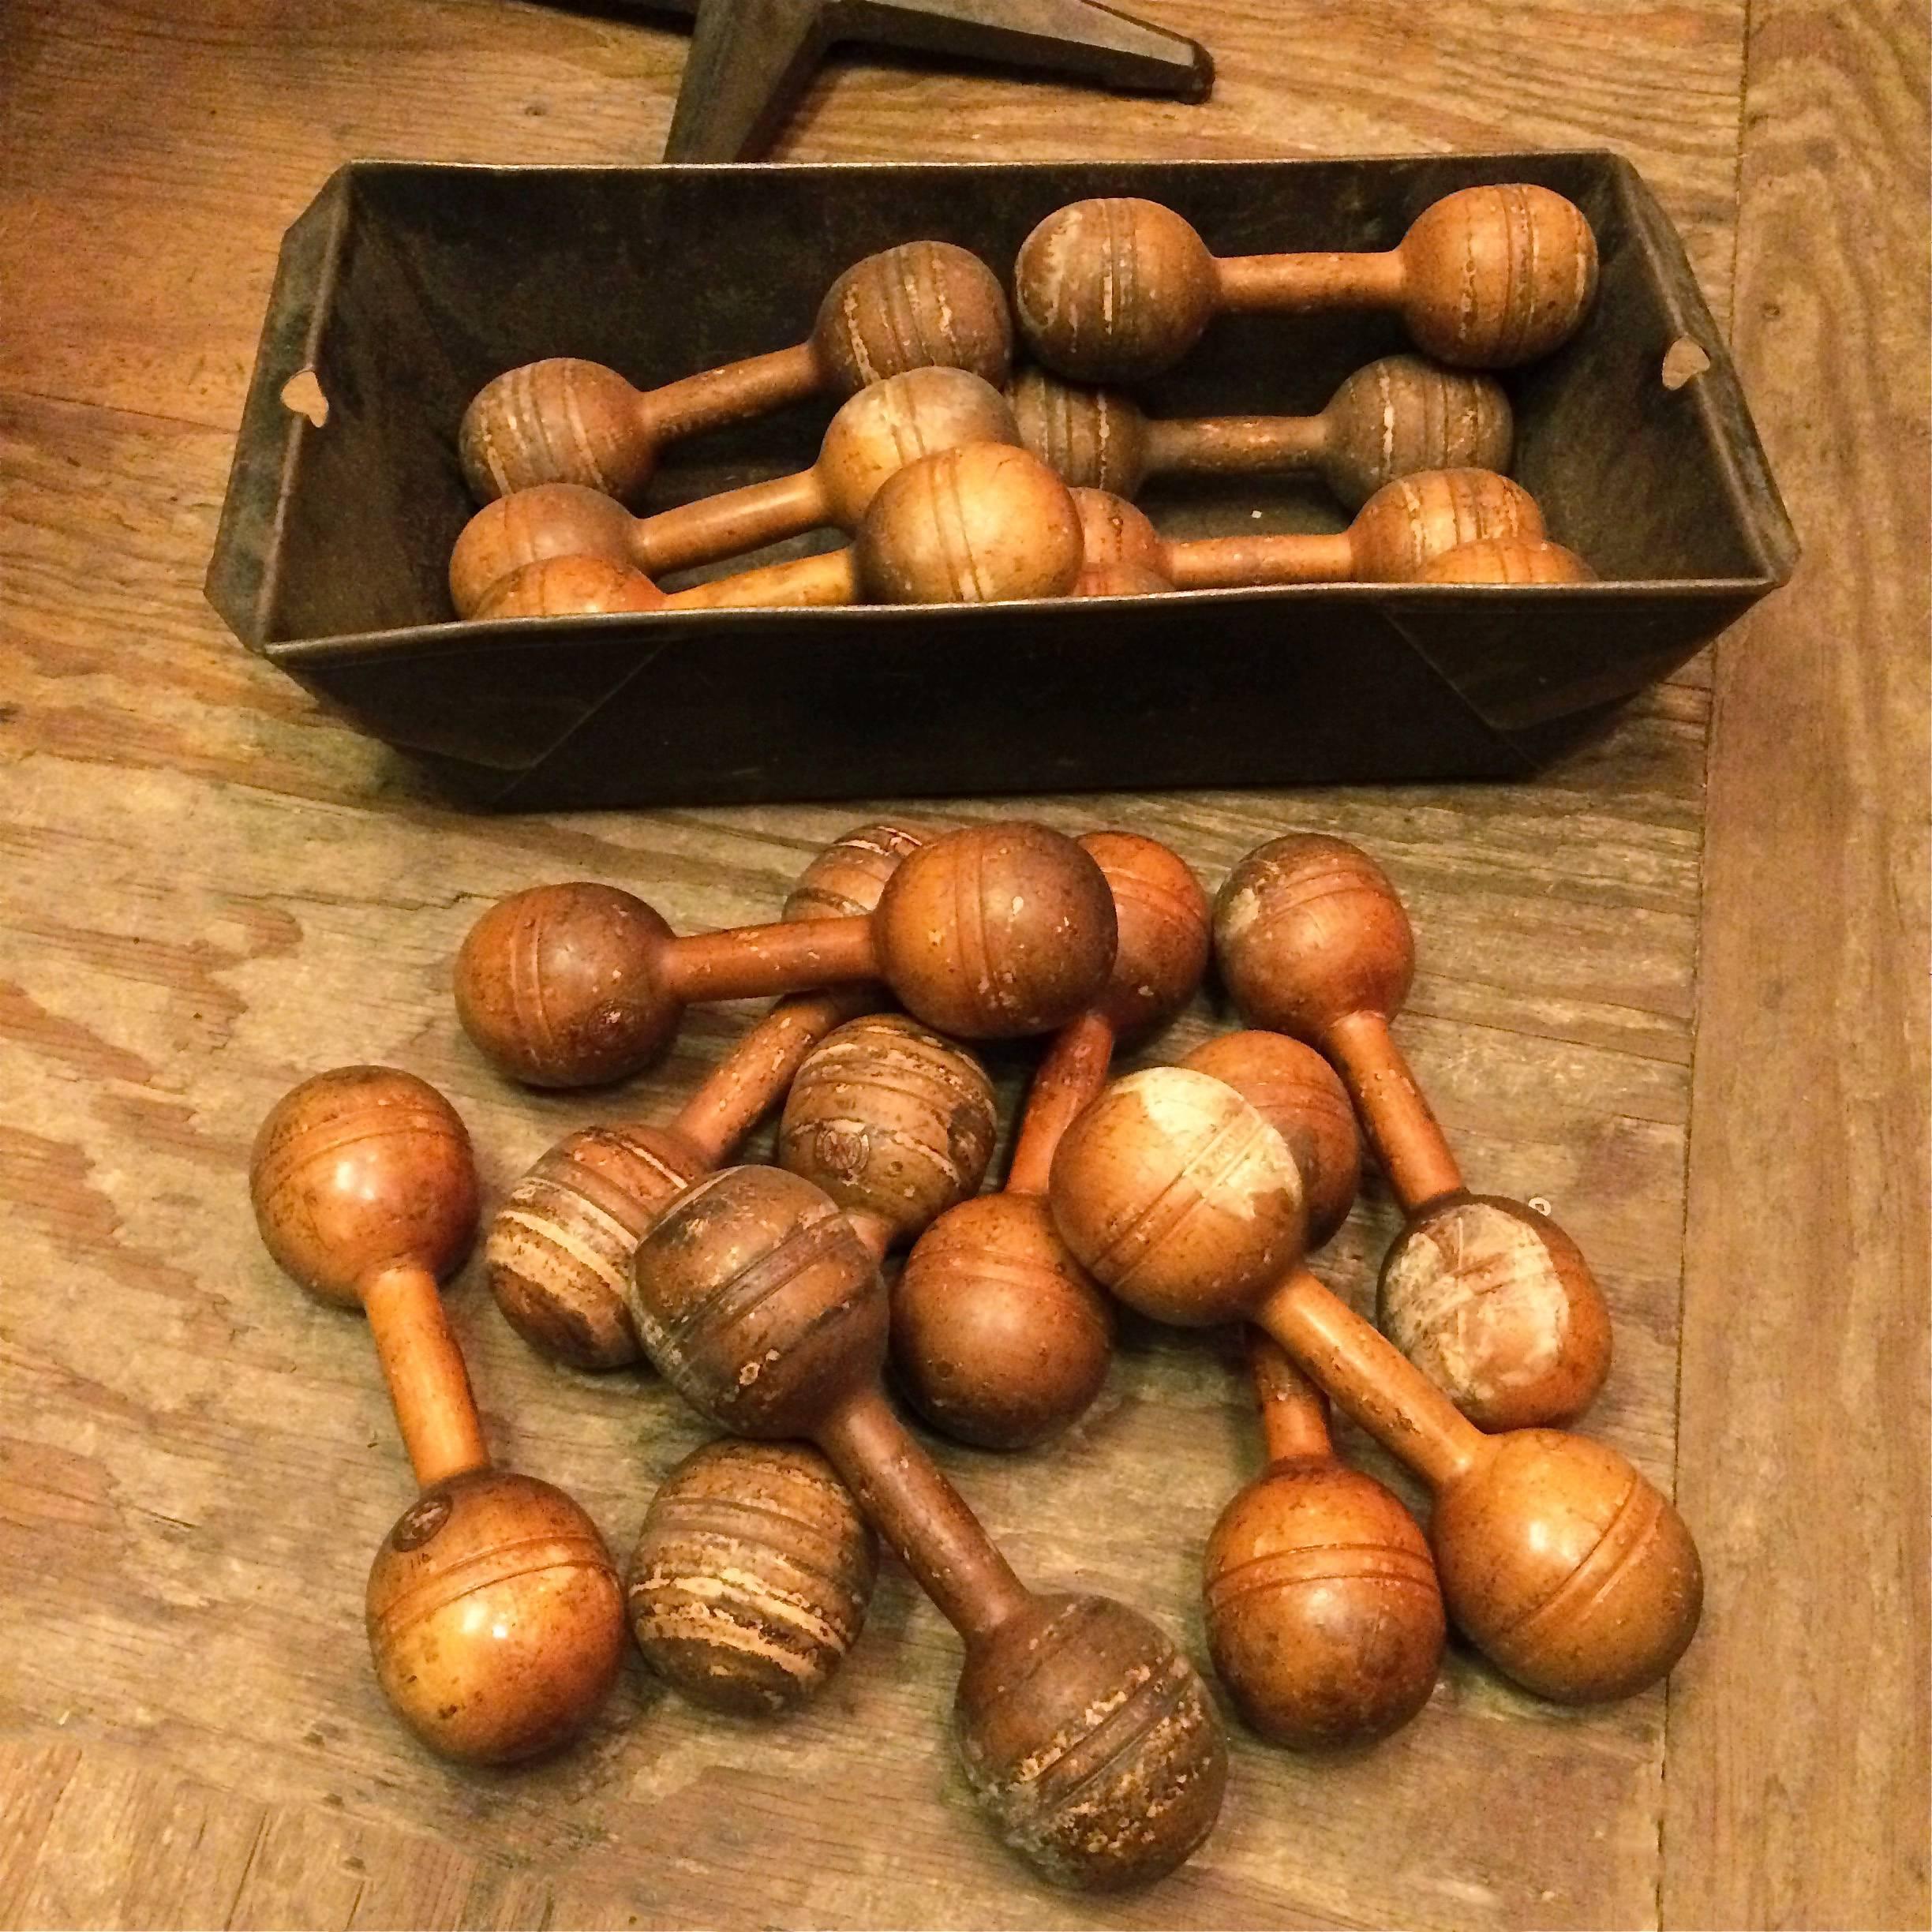 American Pairs of Antique Wooden Dumbbell Hand Weights